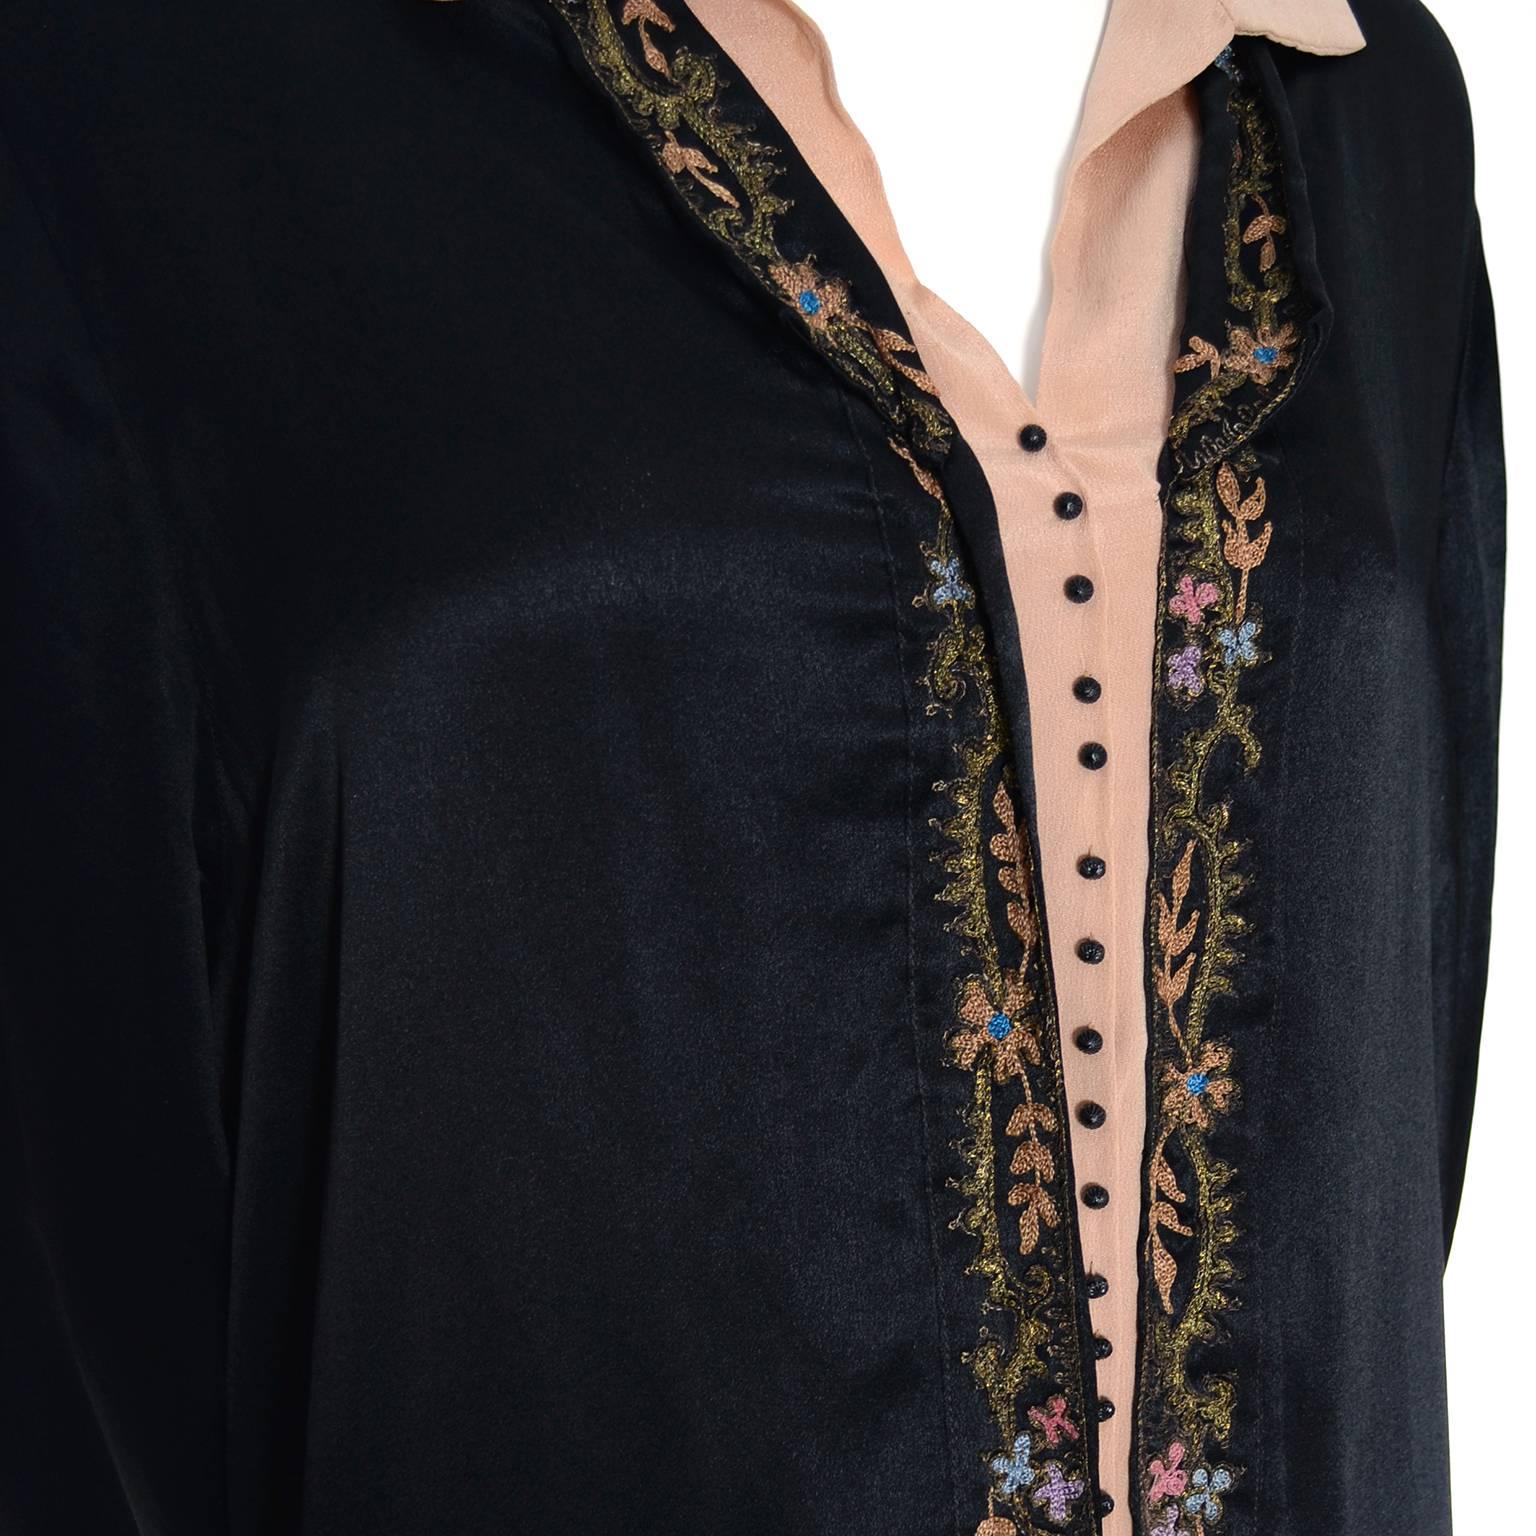 This is a lovely vintage larger size 1920's black silk dress with gorgeous fine floral embroidery and inset pale peachy pink silk fabric with tiny black buttons.  The skirt of this 20s drop waist dress is beautifully pleated and the fabric belt has